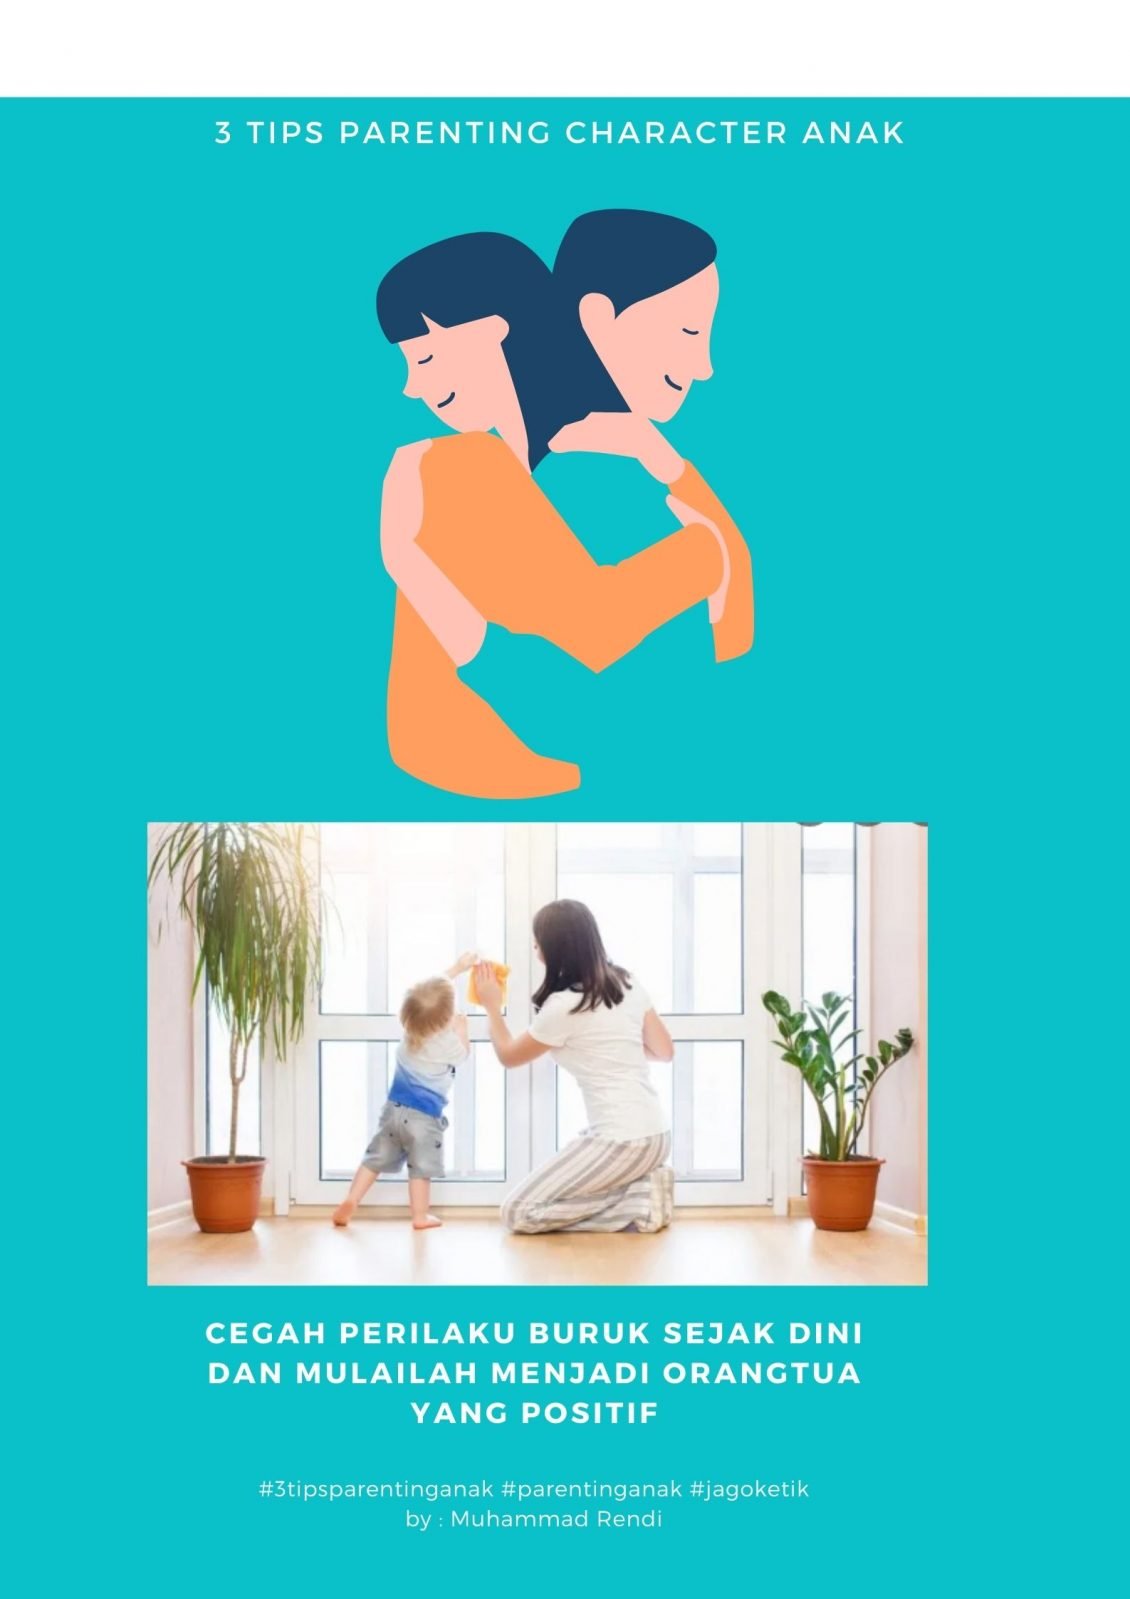 3 TIPS PARENTING CHARACTER ANAK